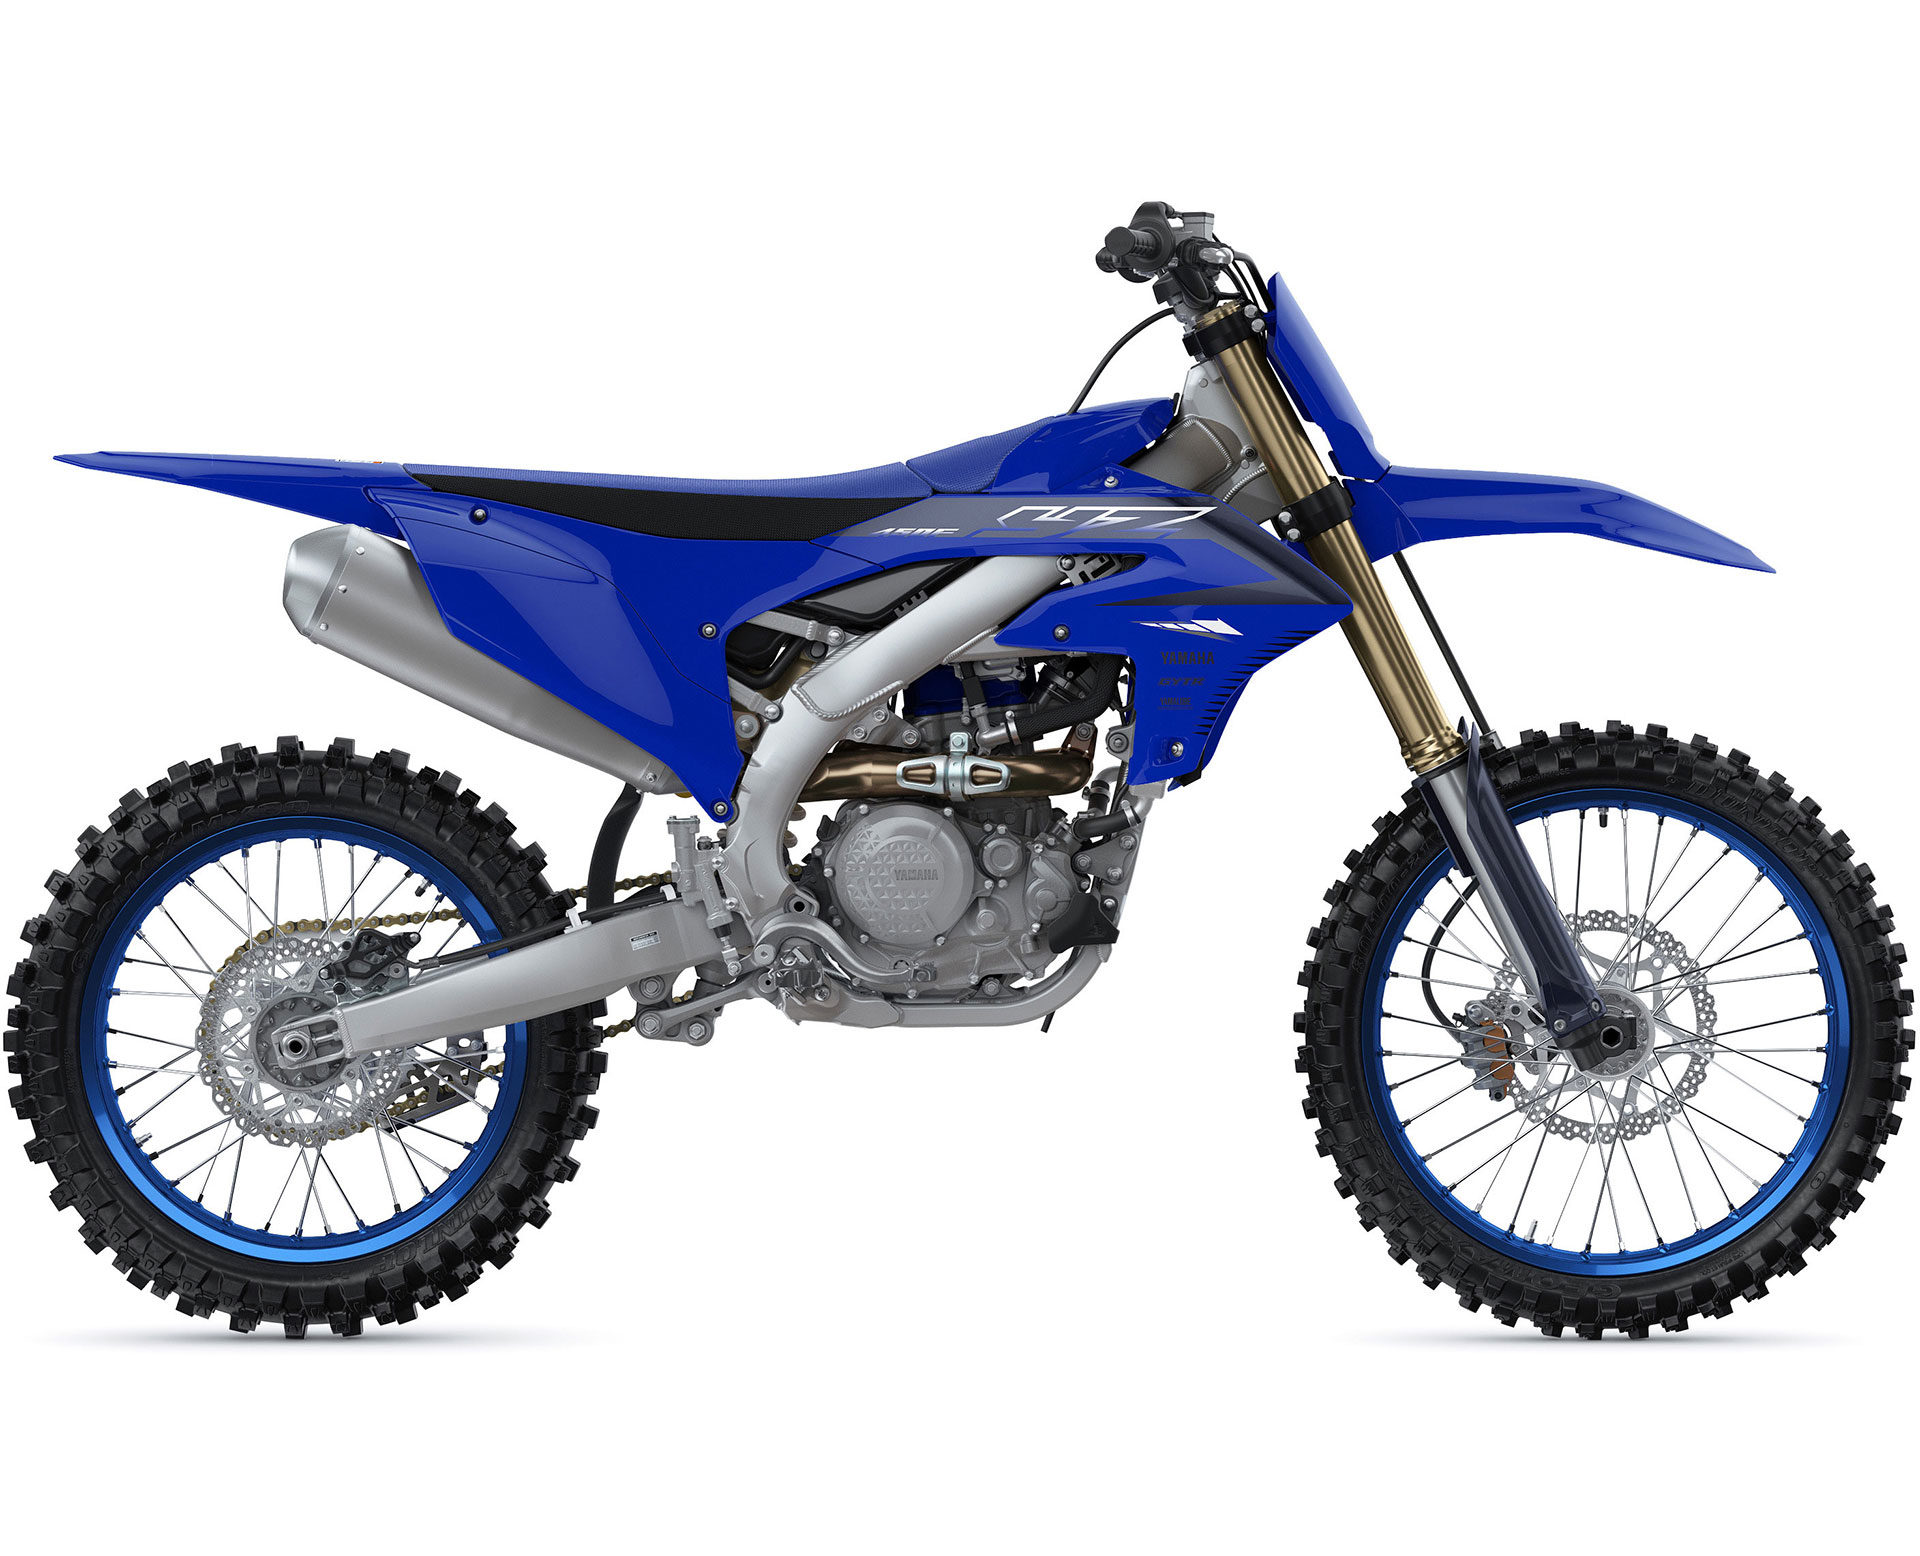 Thumbnail of your customized YZ450F 2023